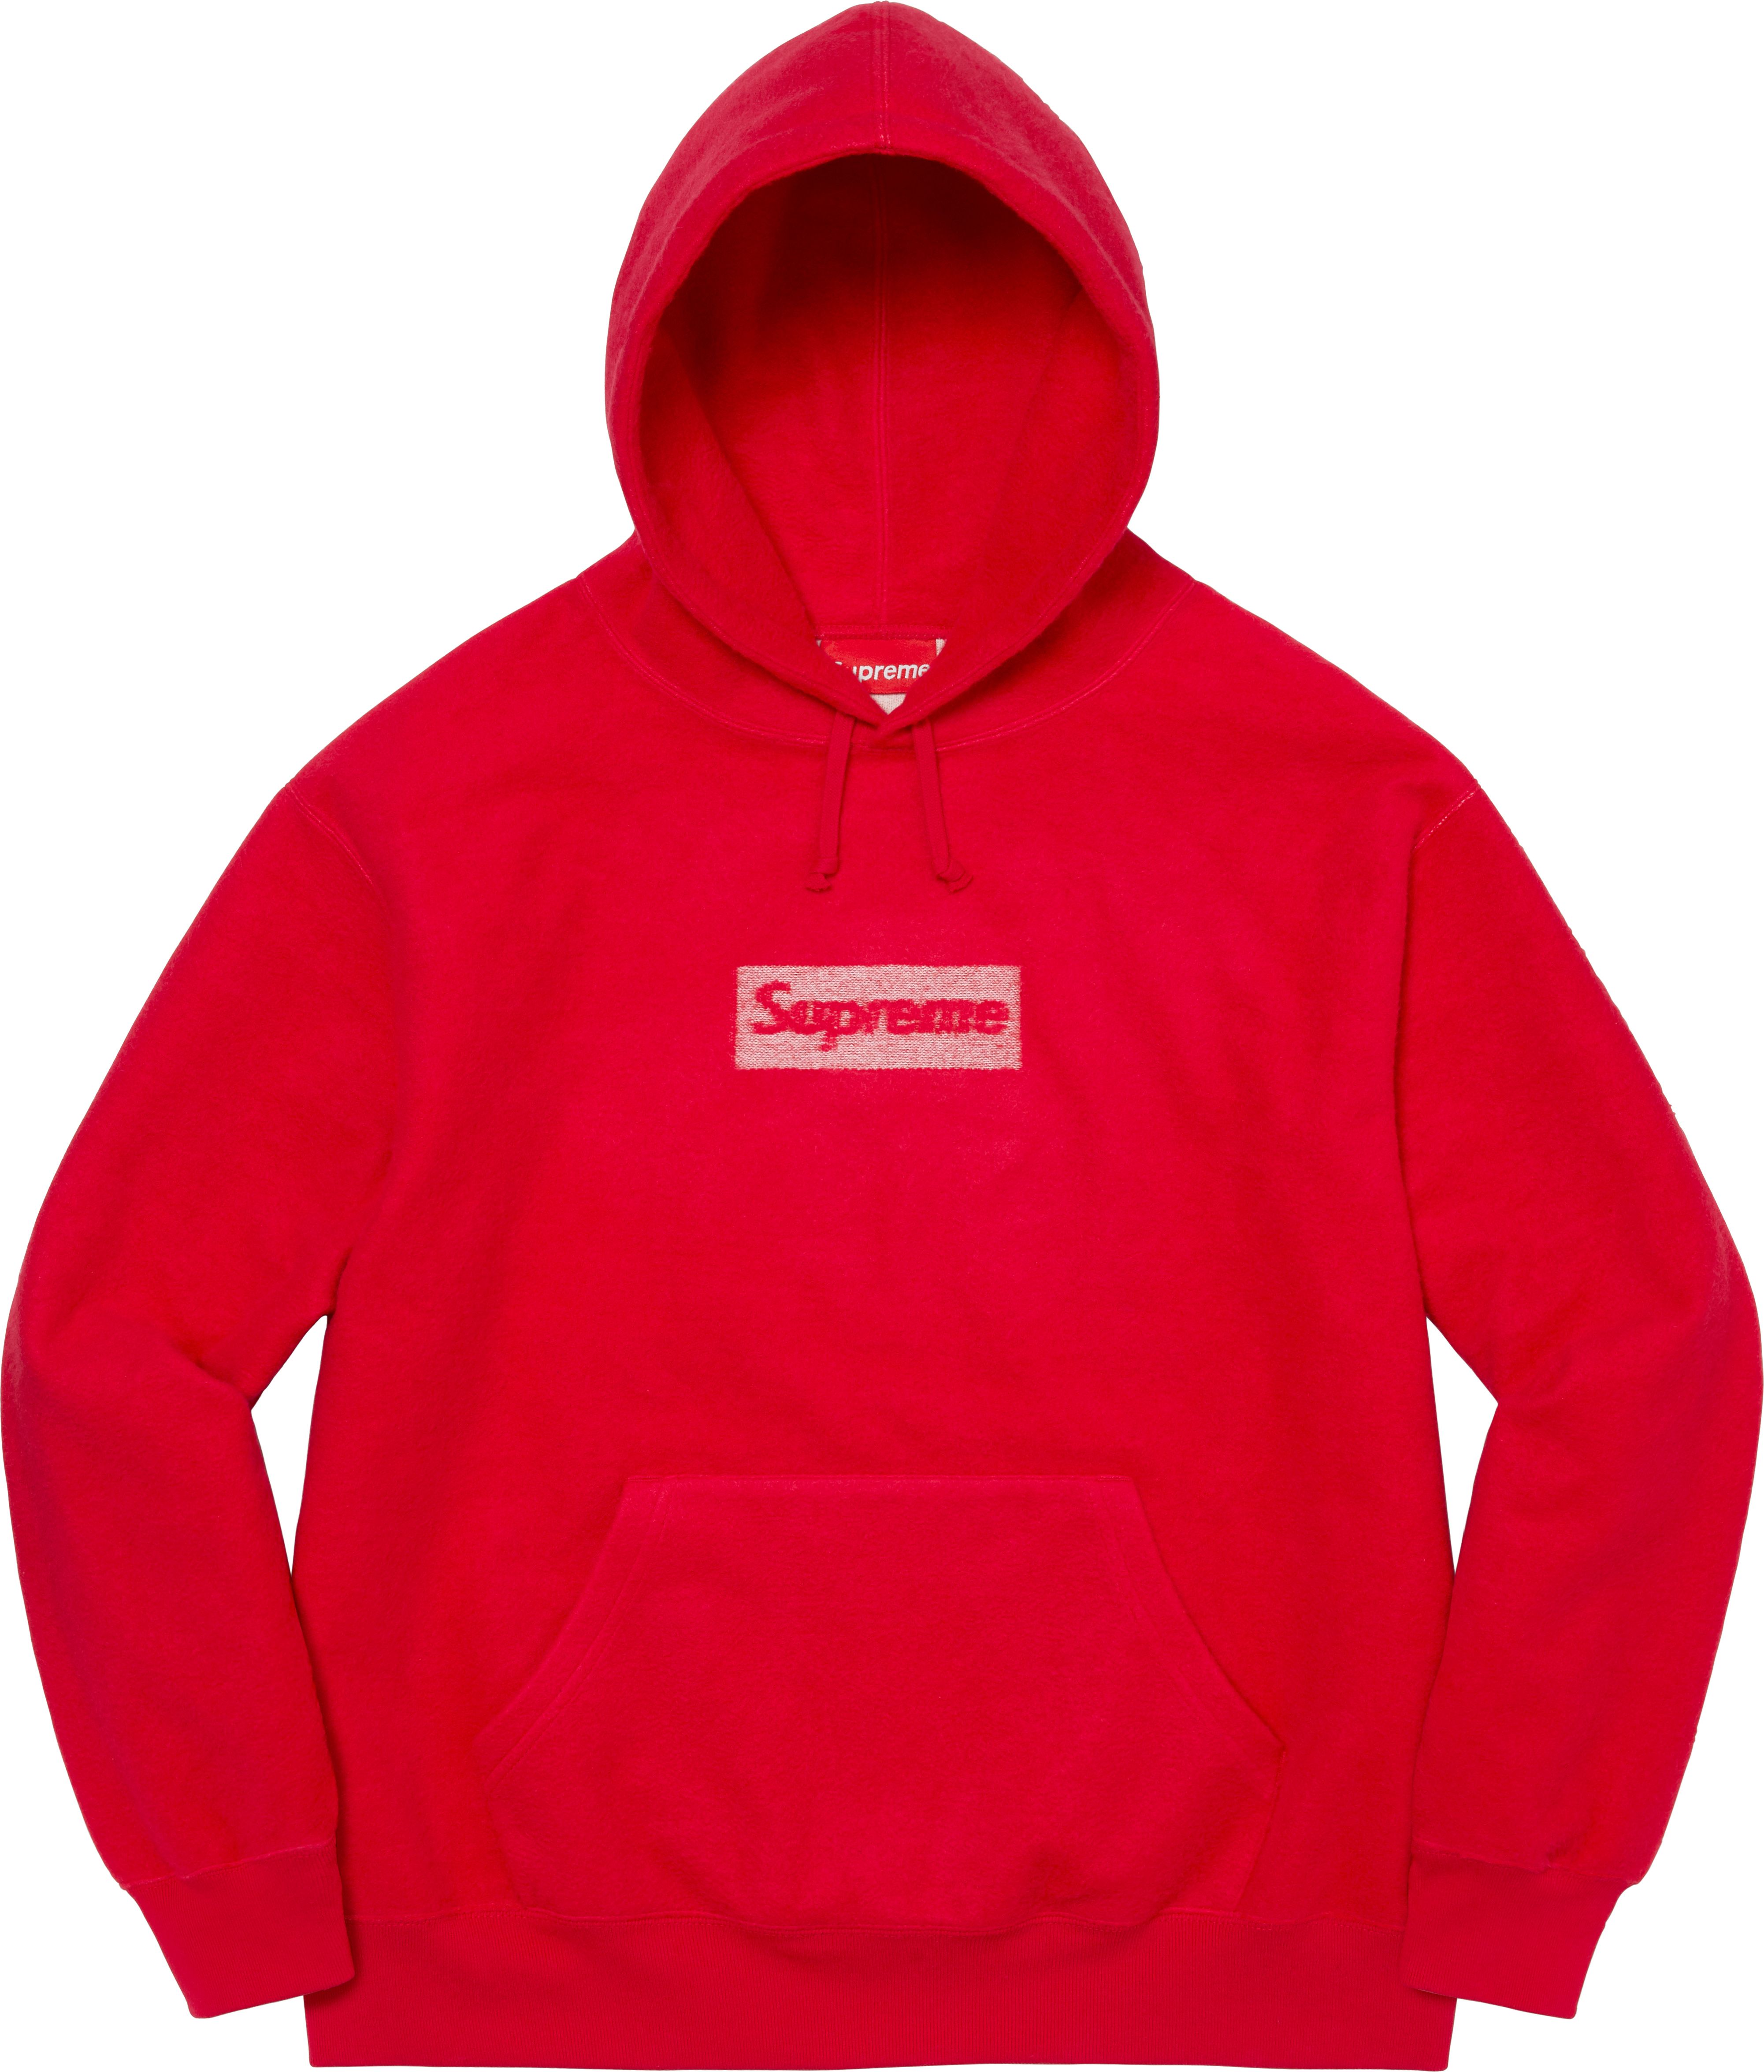 Supreme Inside Out Box Logo Hooded Sweatshirt Black S, M, L in Hand 